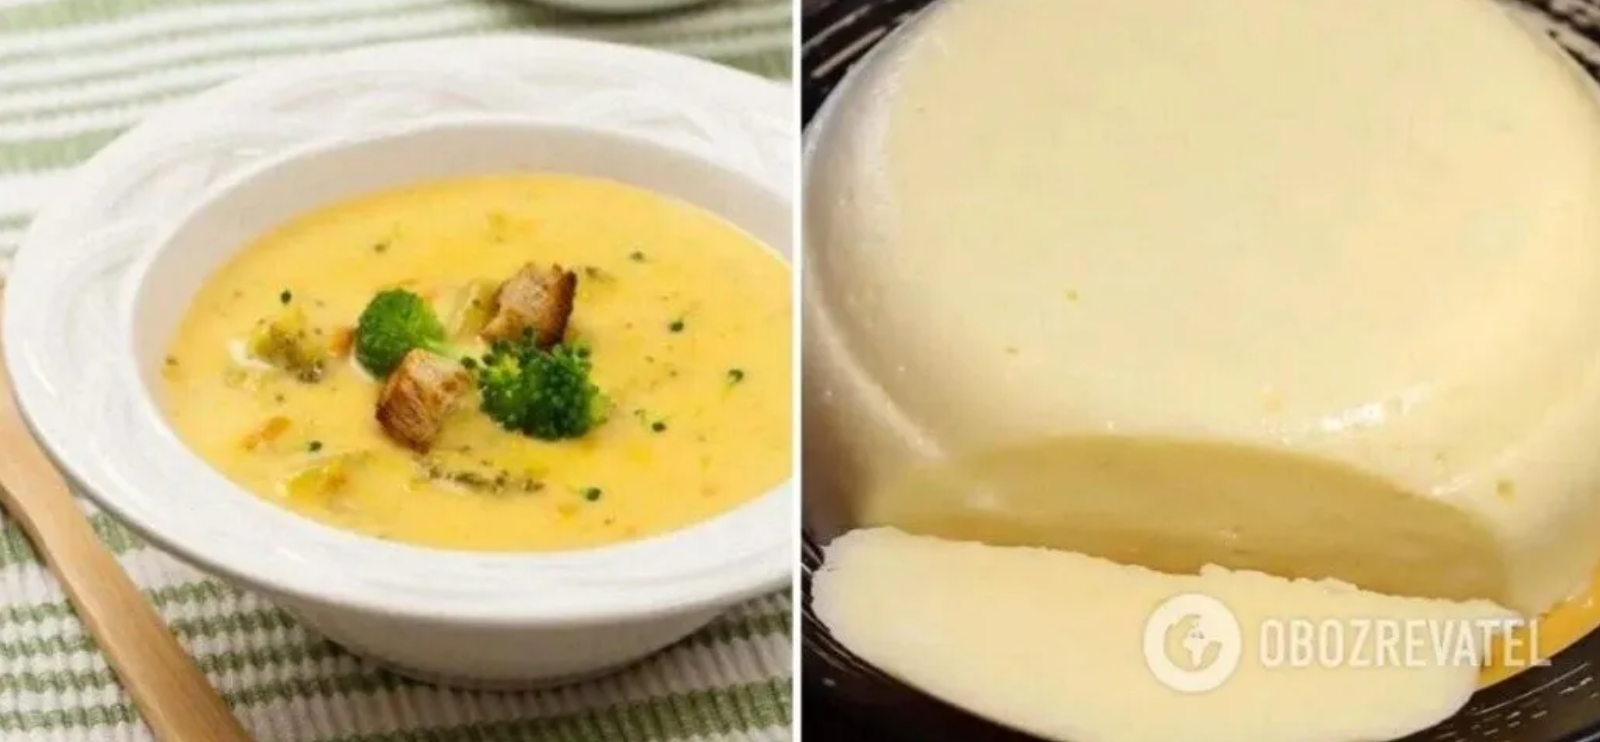 Soup with melted cheese